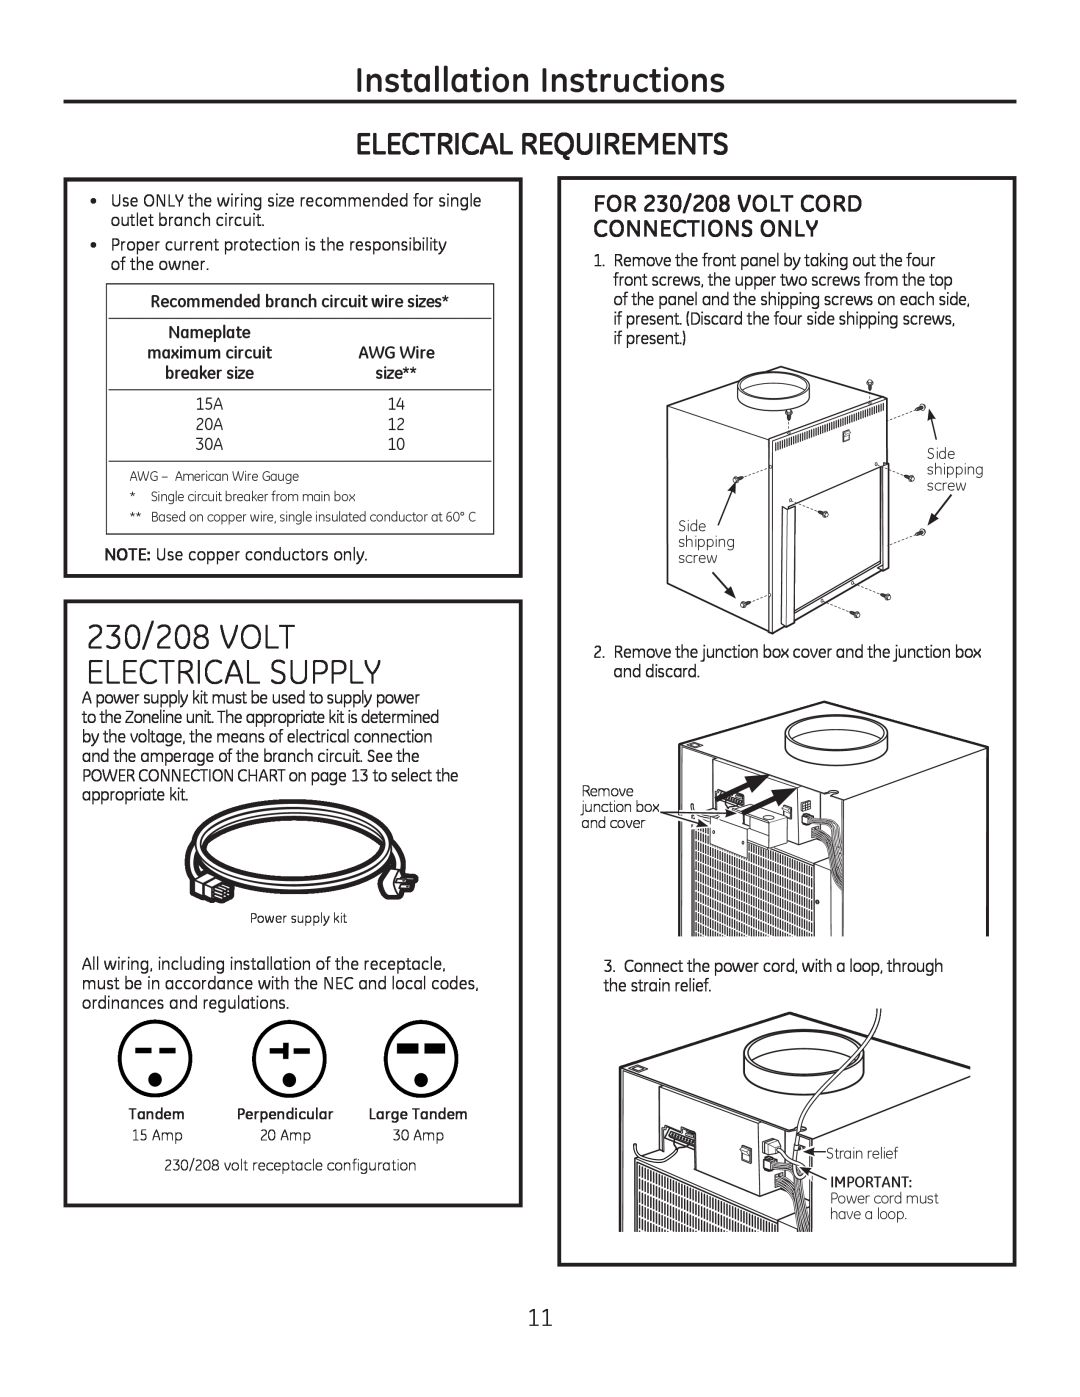 GE 8500 Series installation instructions Installation Instructions, Electrical Requirements, 230/208 VOLT ELECTRICAL SUPPLY 